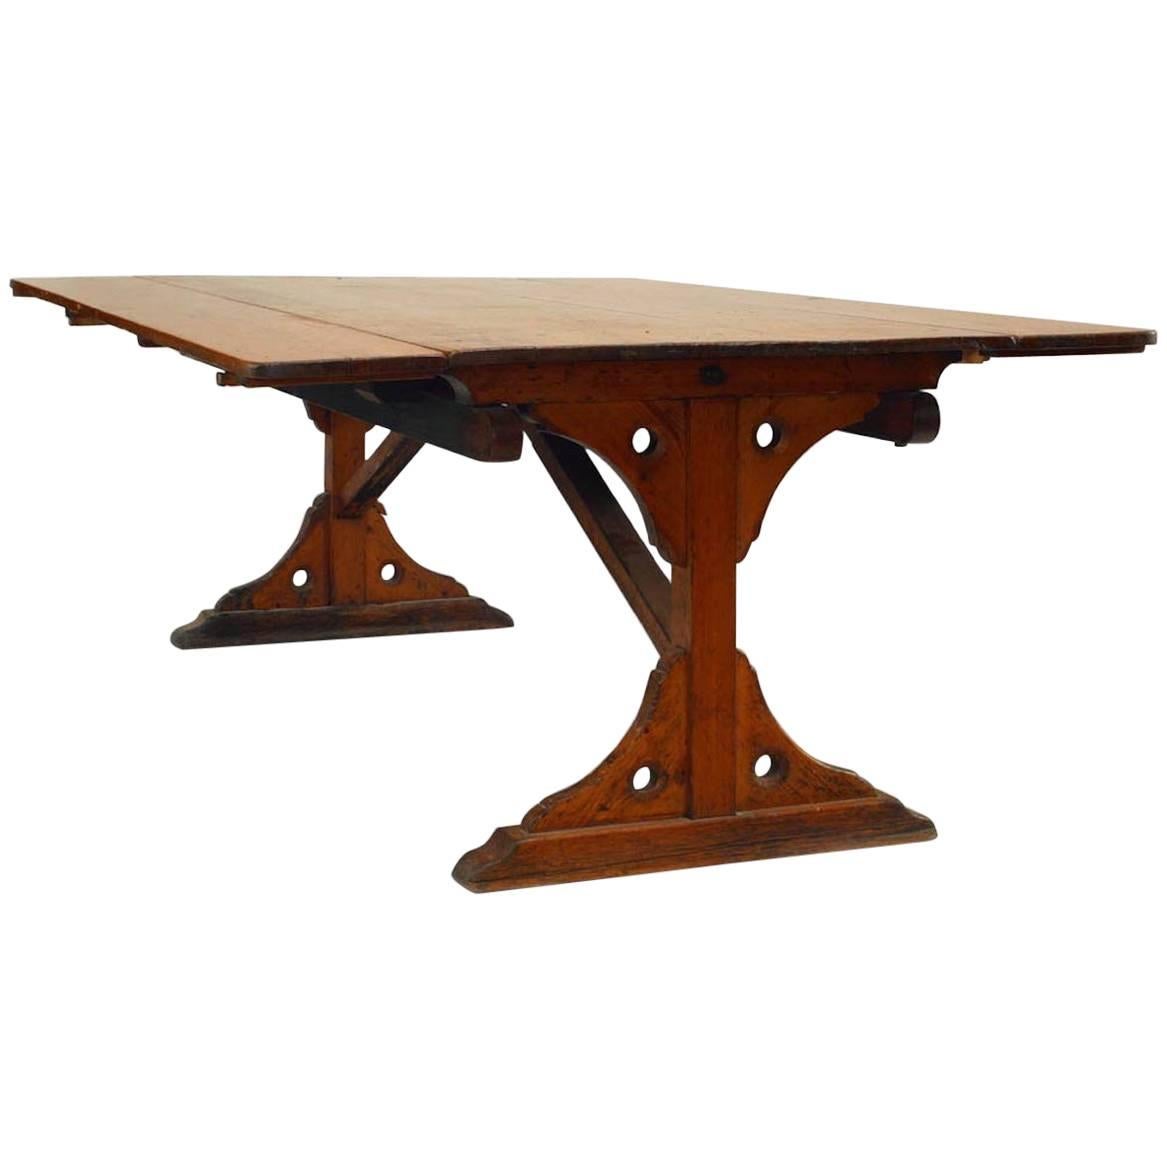 American Country Pine "Harvest" Table